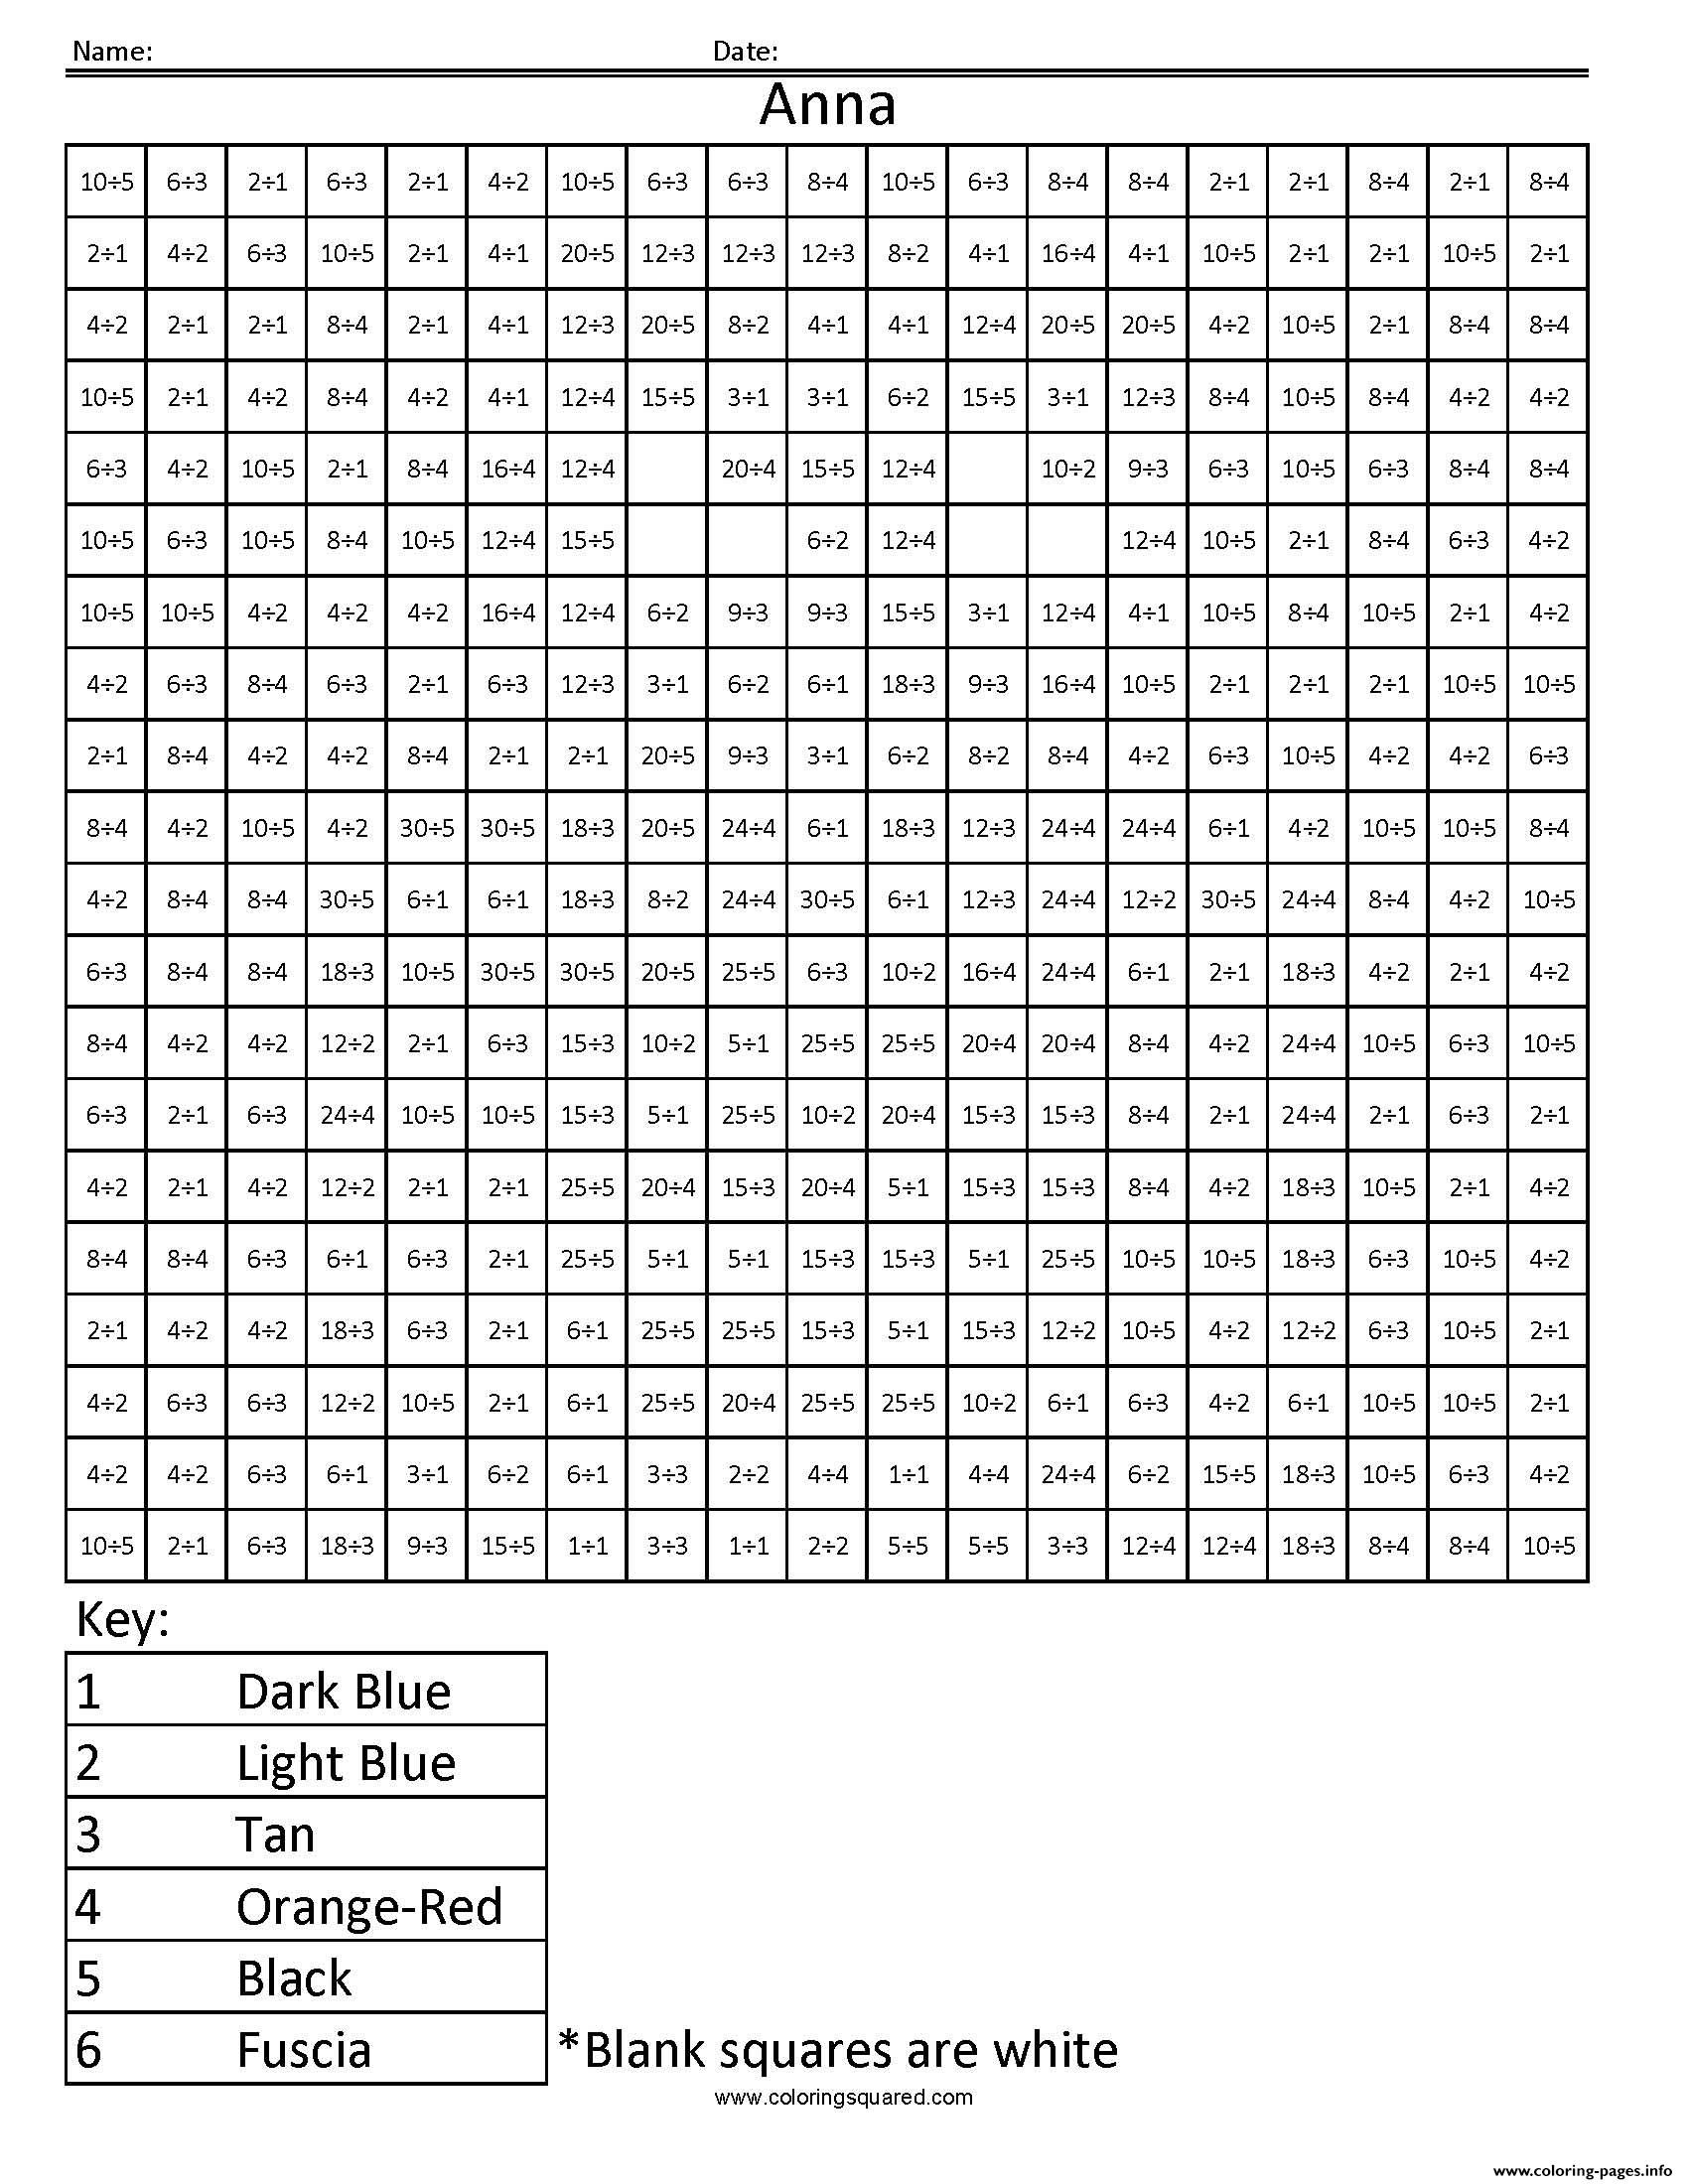 Coloring Squared Worksheets Anna Division Frozen Math Coloring Squared Disney Pixel Art